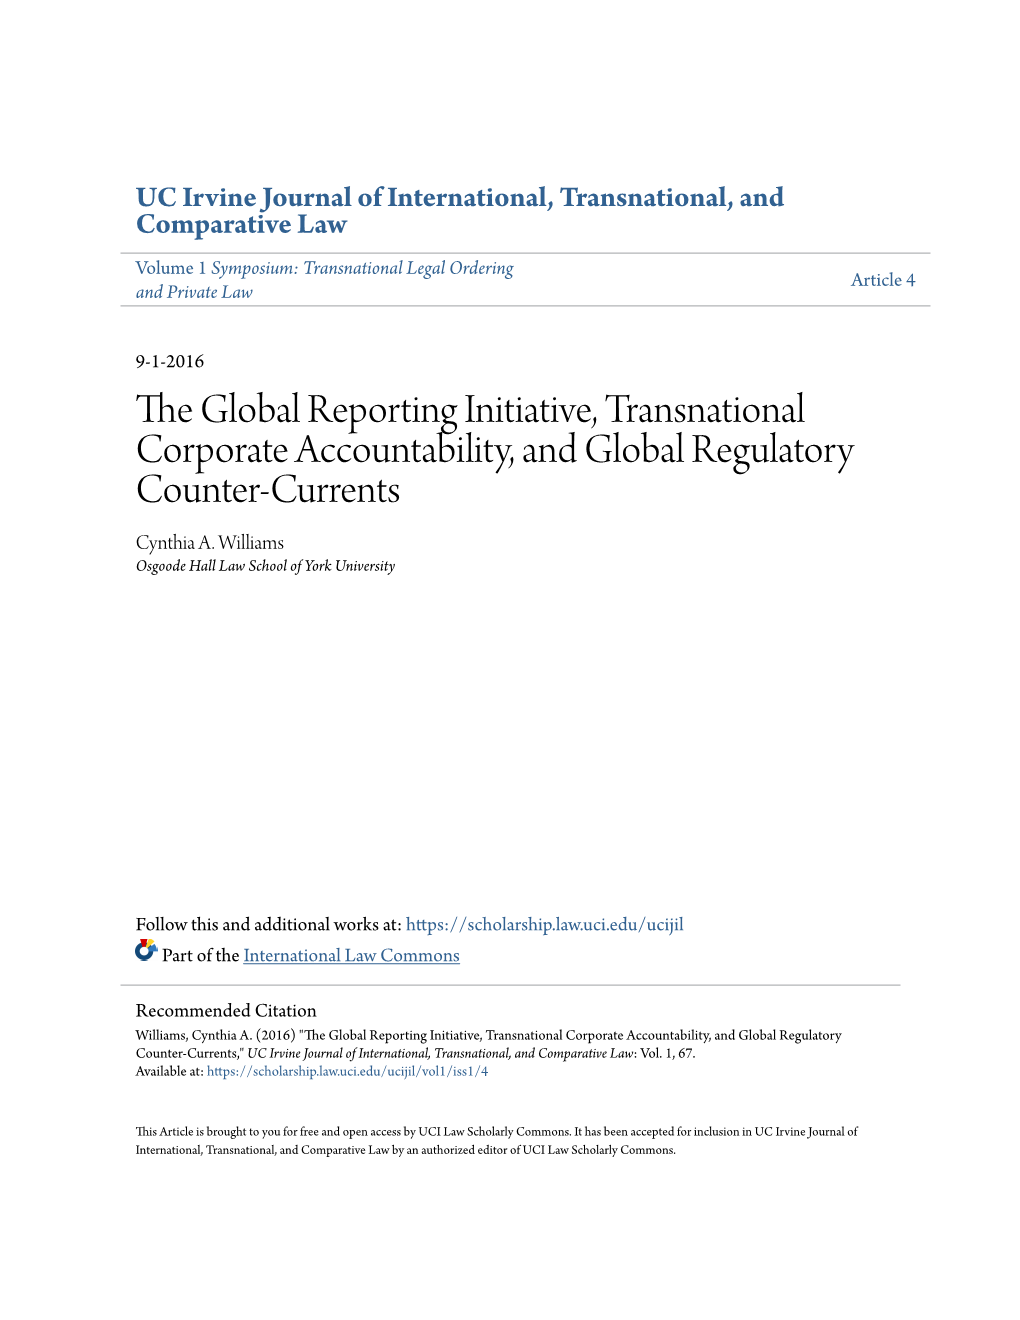 The Global Reporting Initiative, Transnational Corporate Accountability, and Global Regulatory Counter-Currents Cynthia A